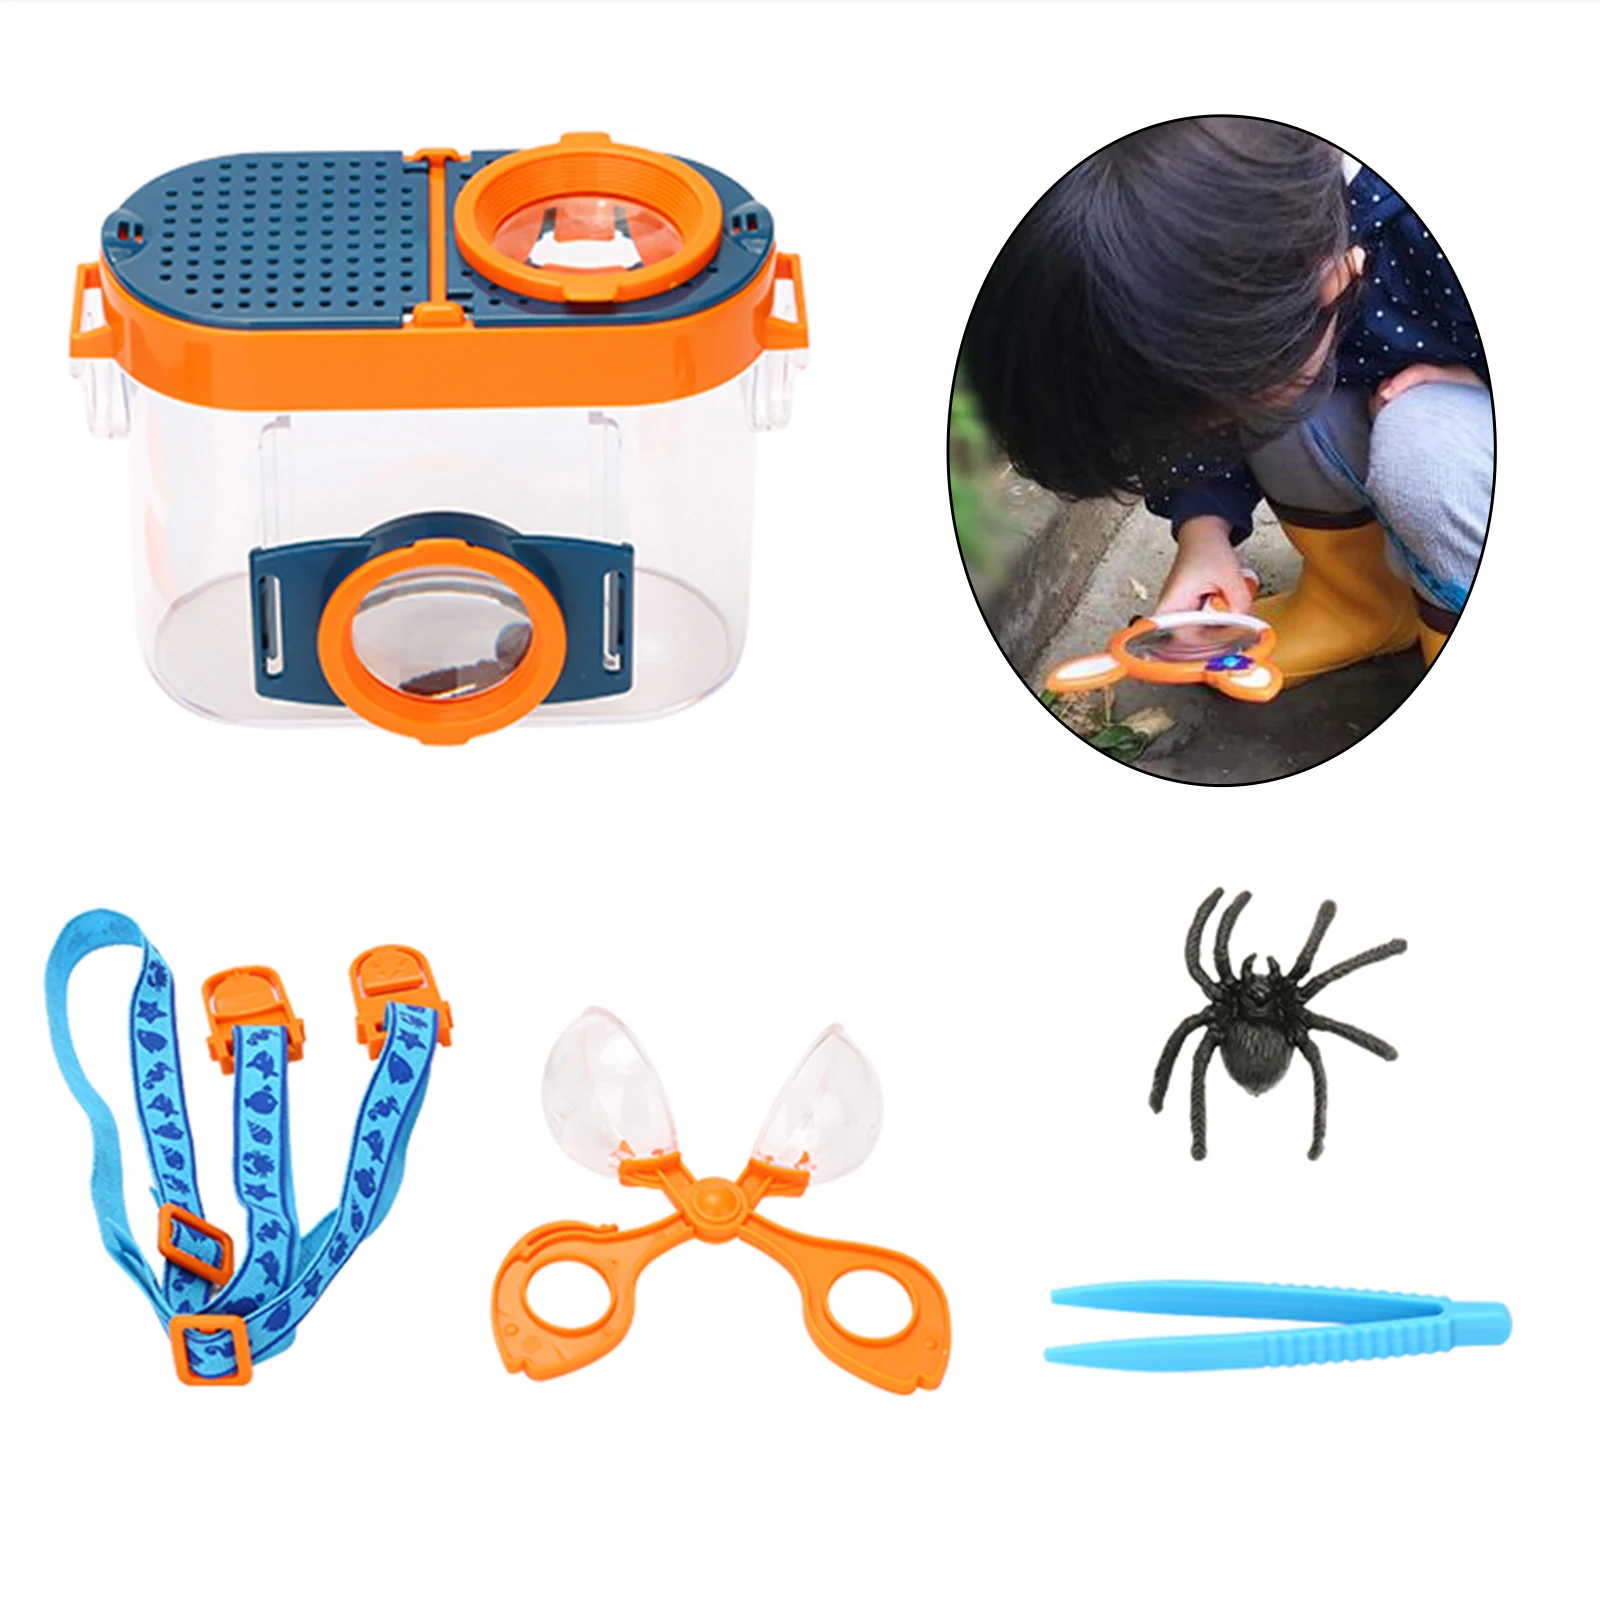 Kid Science Class Viewer Kid Children Educational Toy for Kids Gift